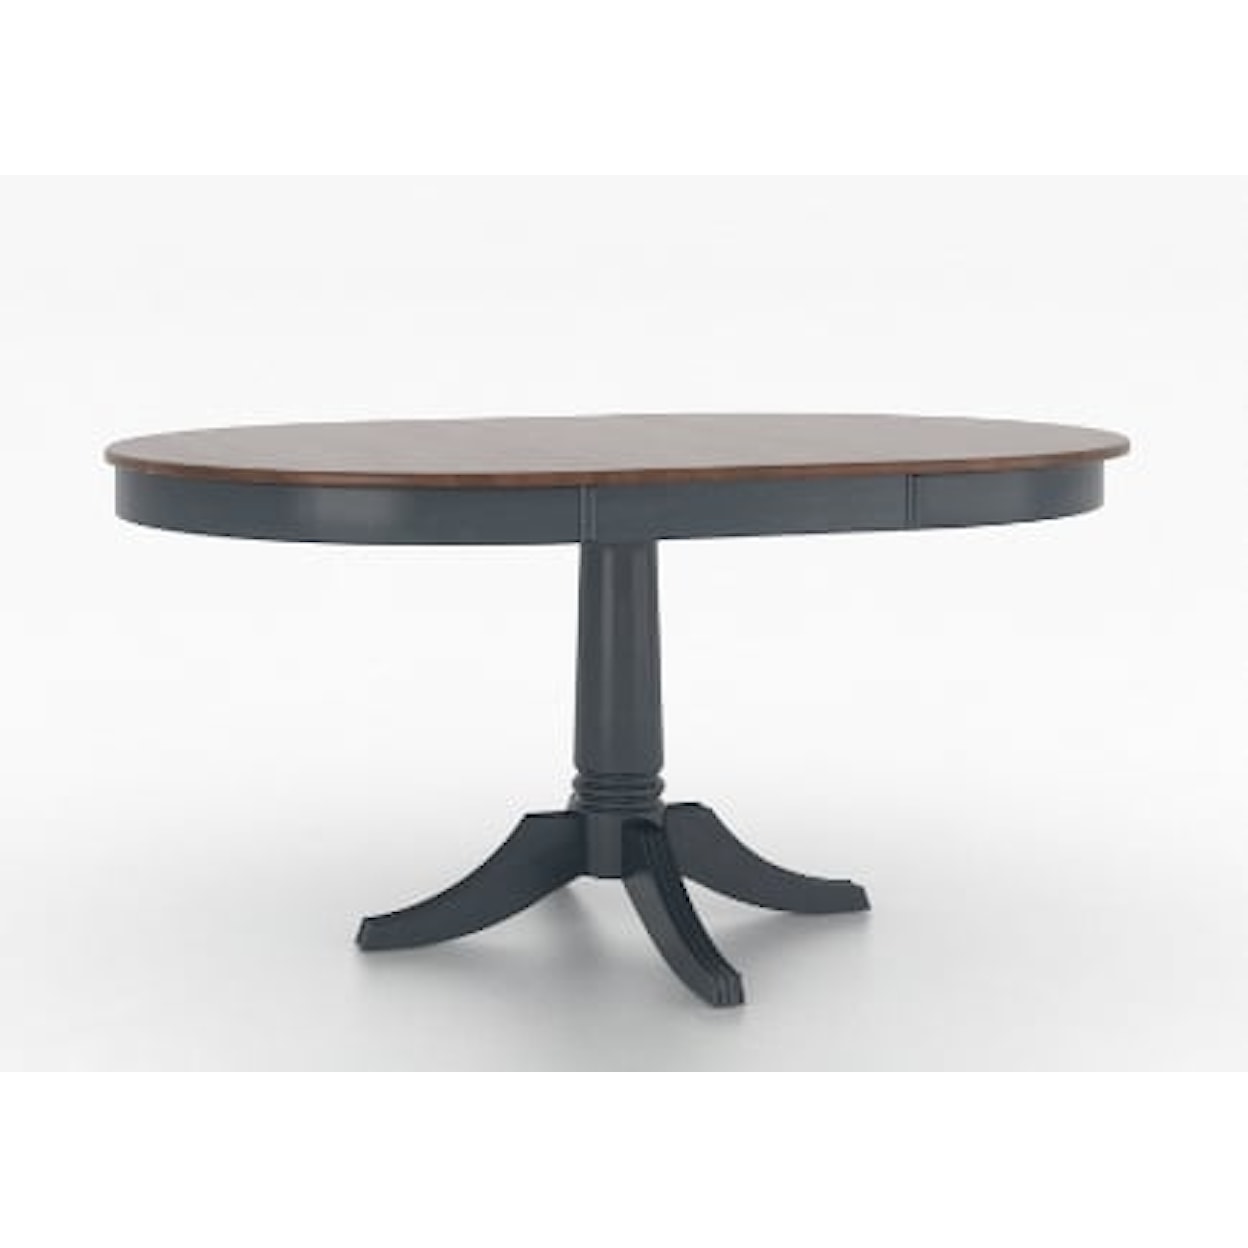 Canadel Canadel Customizable Round Table w/ Pedestal